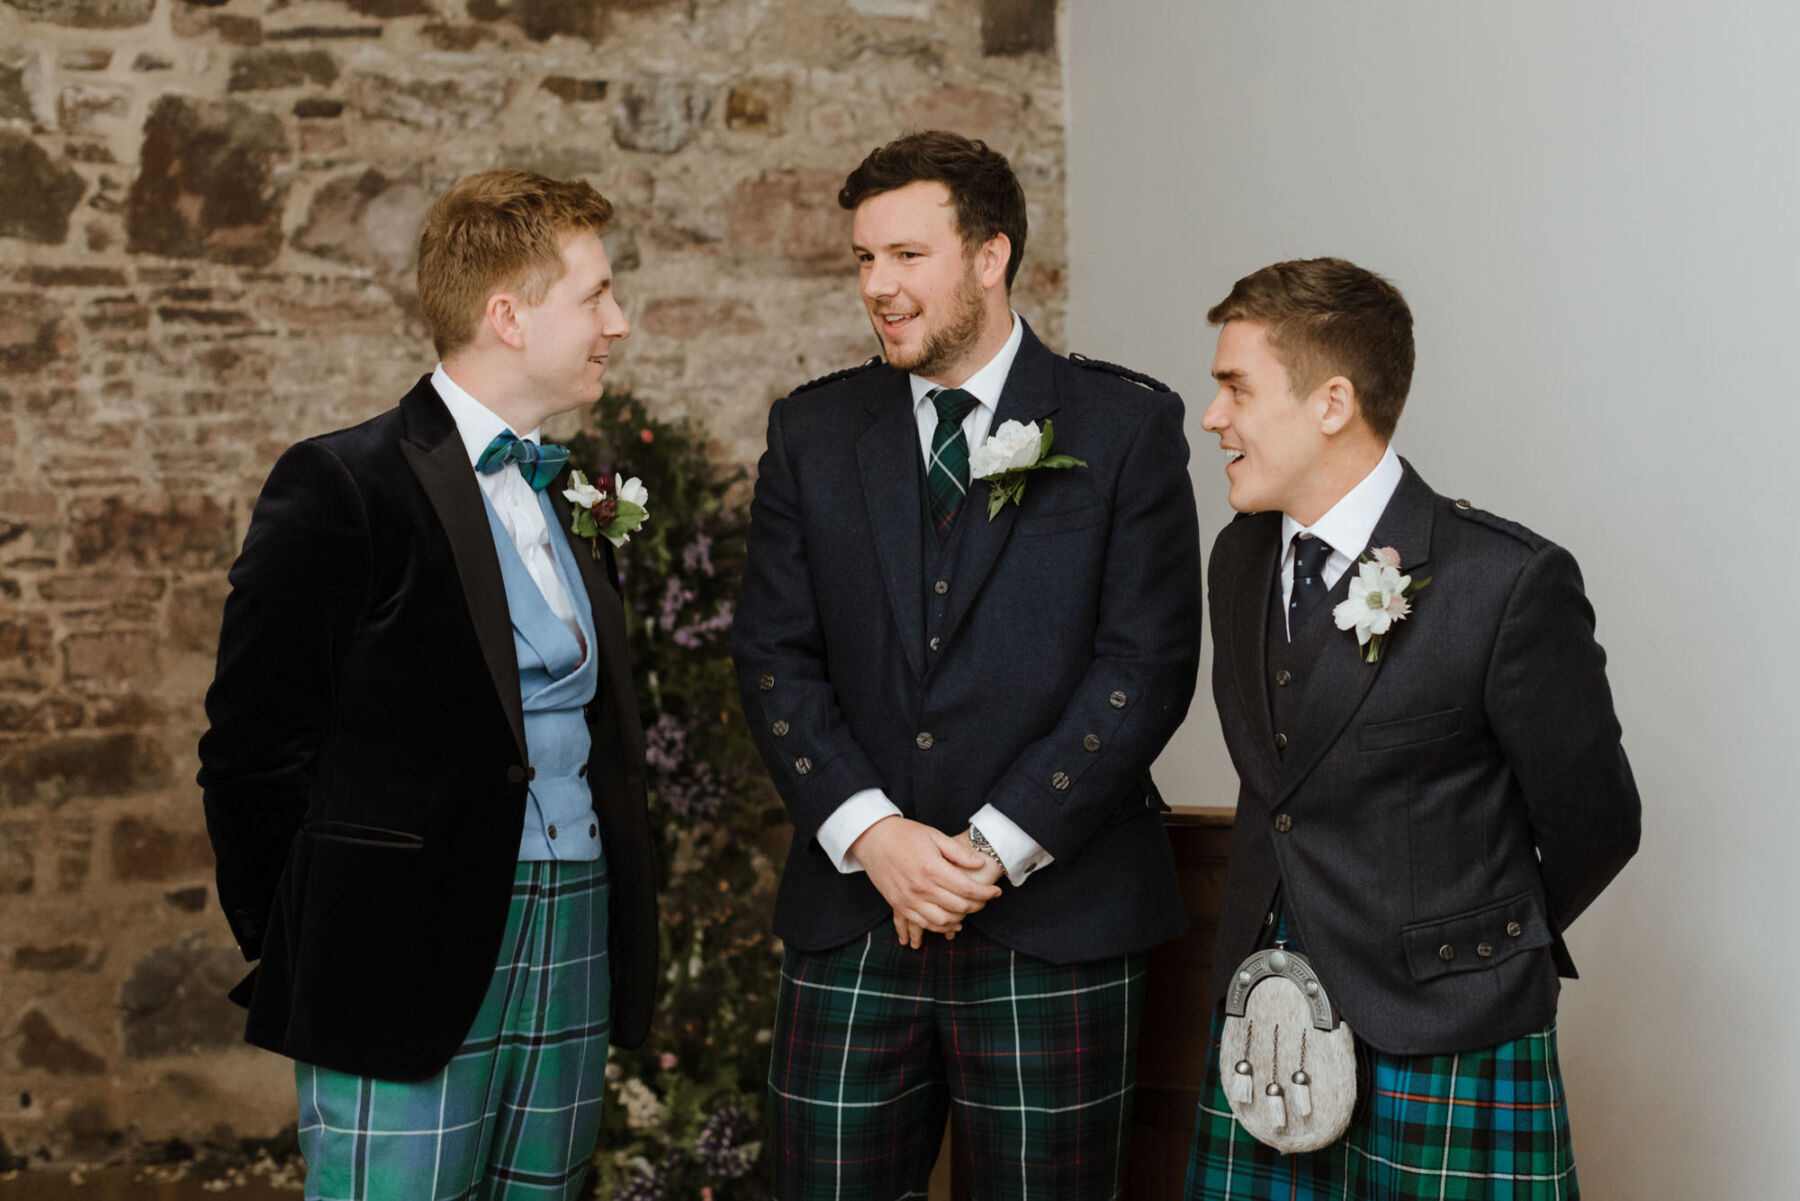 Groom in a kilt waiting for bride. Caro Weiss photography.